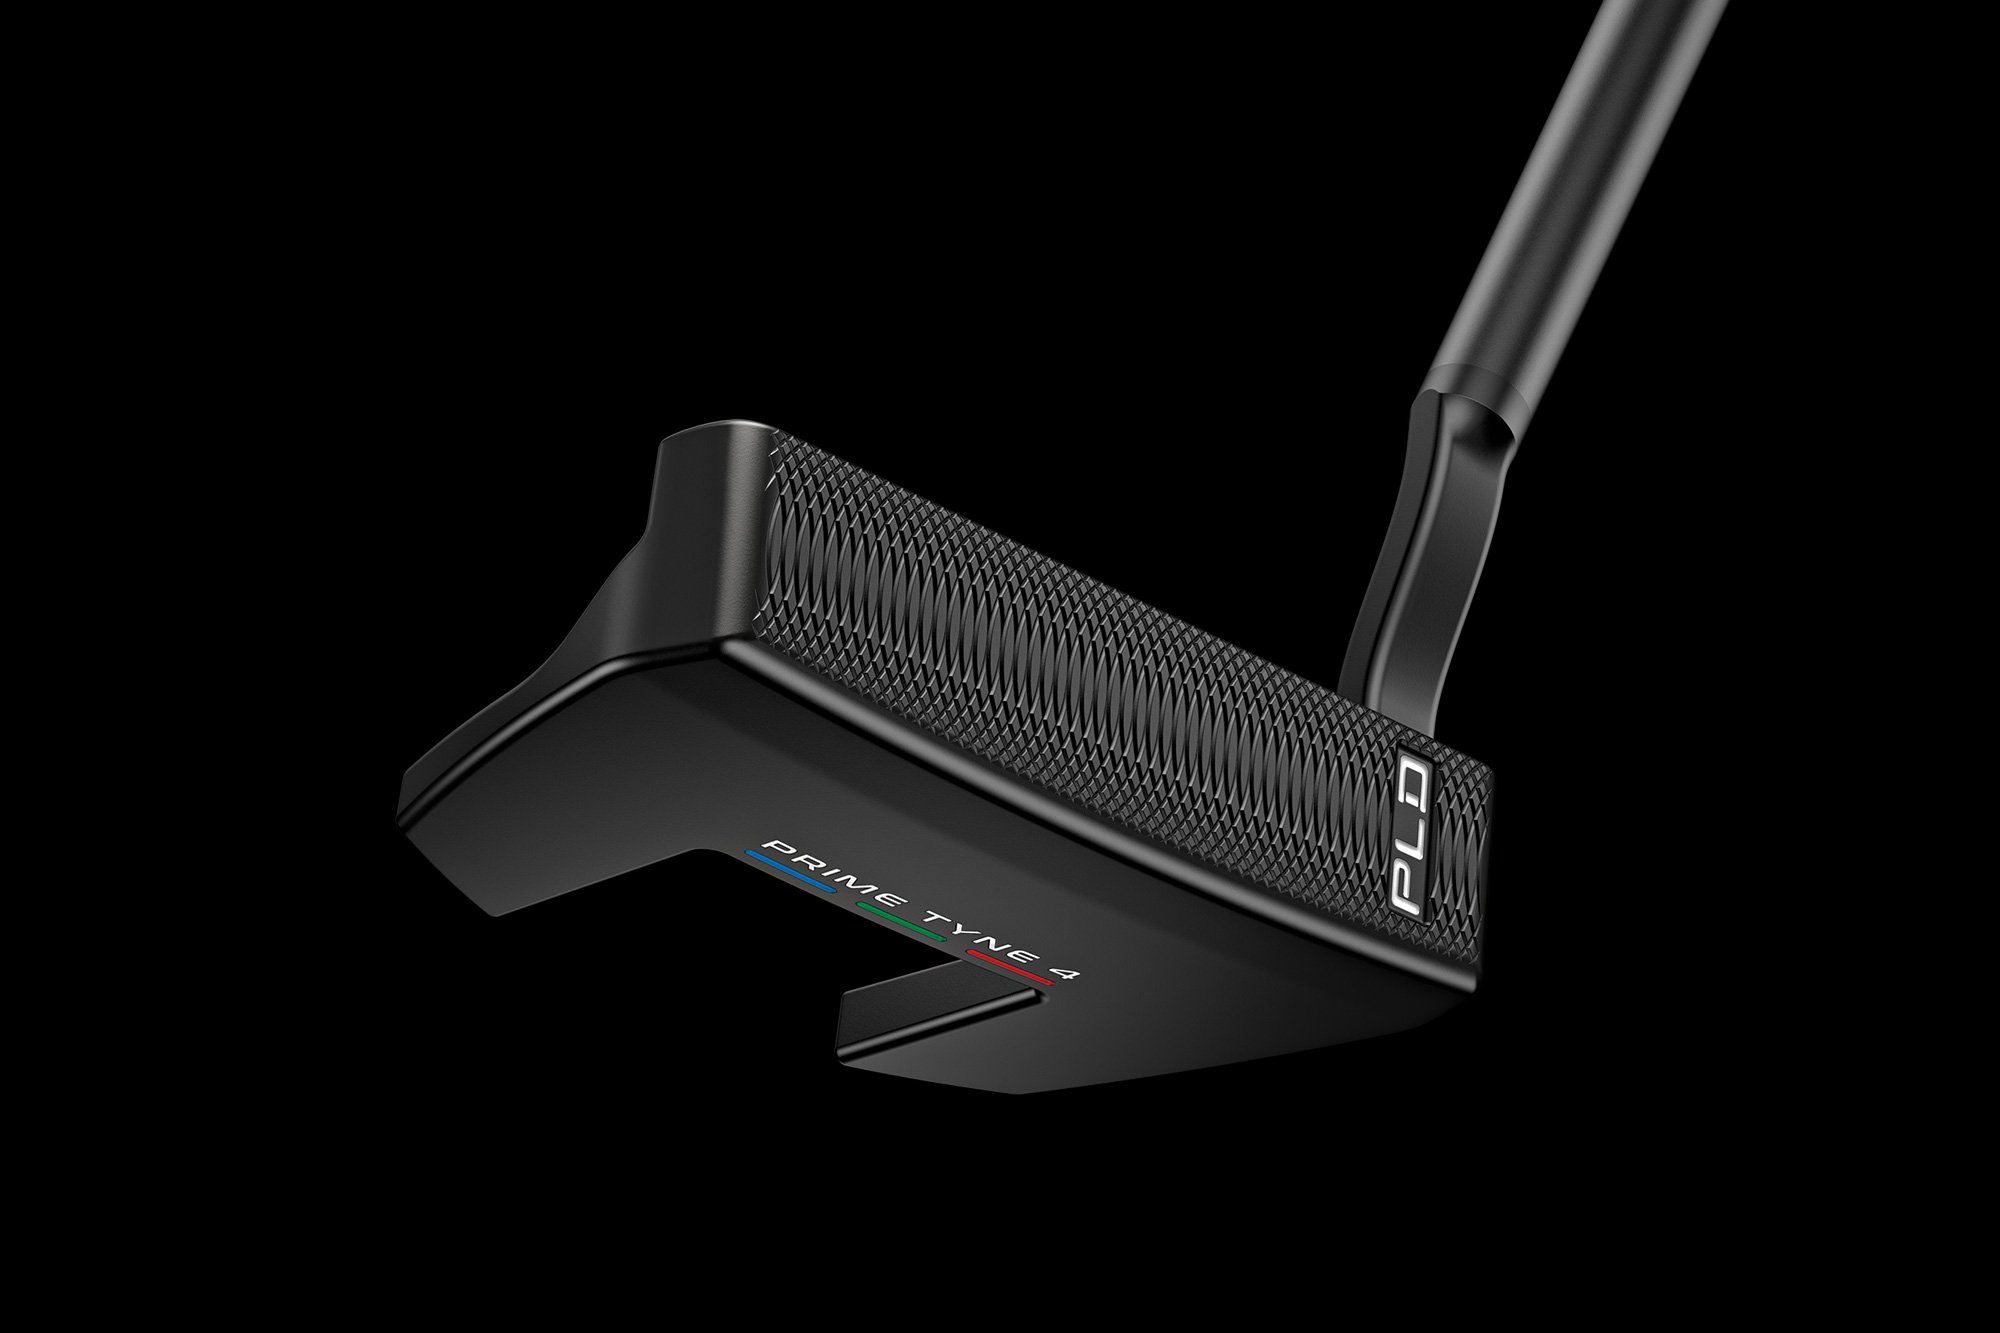 Ping PLD milled putter review